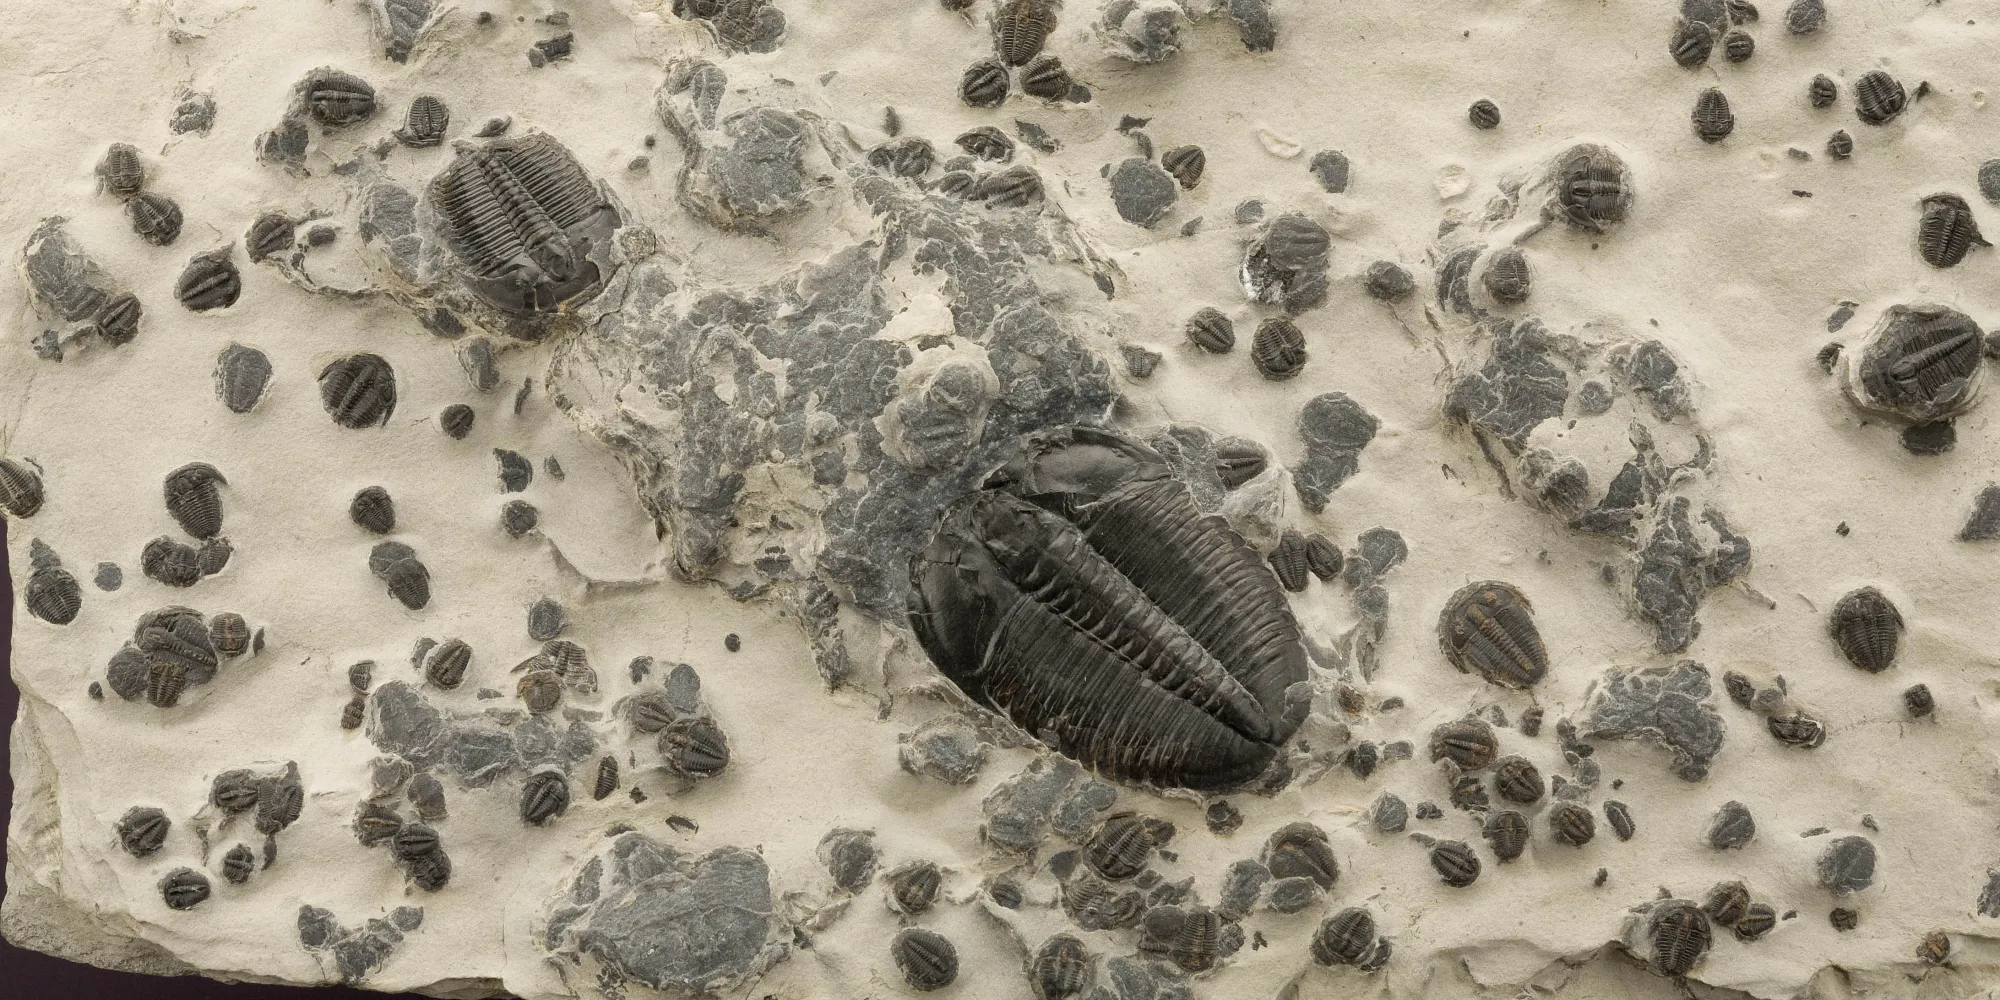 Image depicts a rock slab containing many trilobites of various sizes and taxa